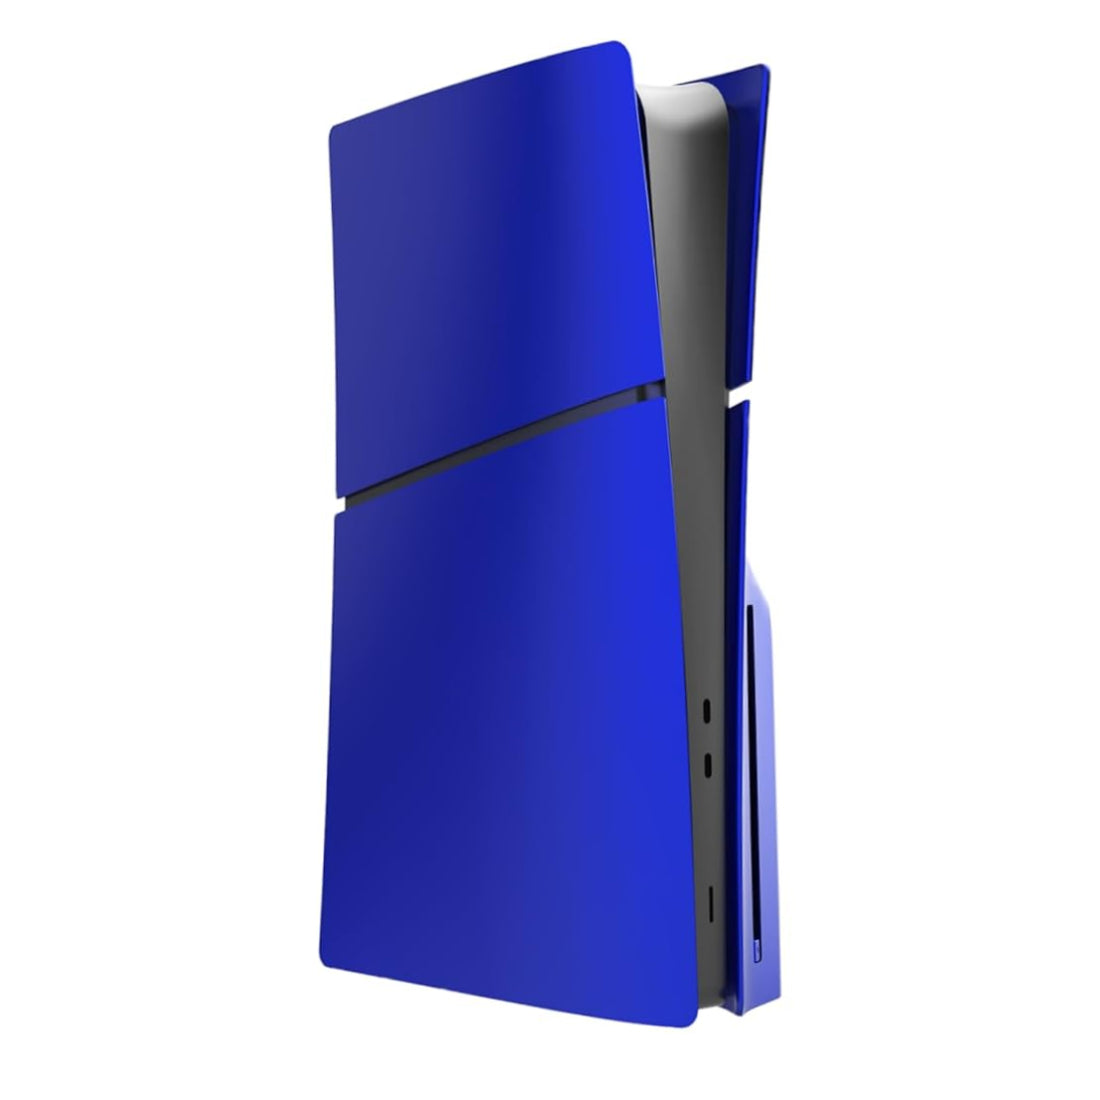 Faceplate Slim Plastic Cover For Playstation 5 - Disc Edition - Blue - أكسسوار